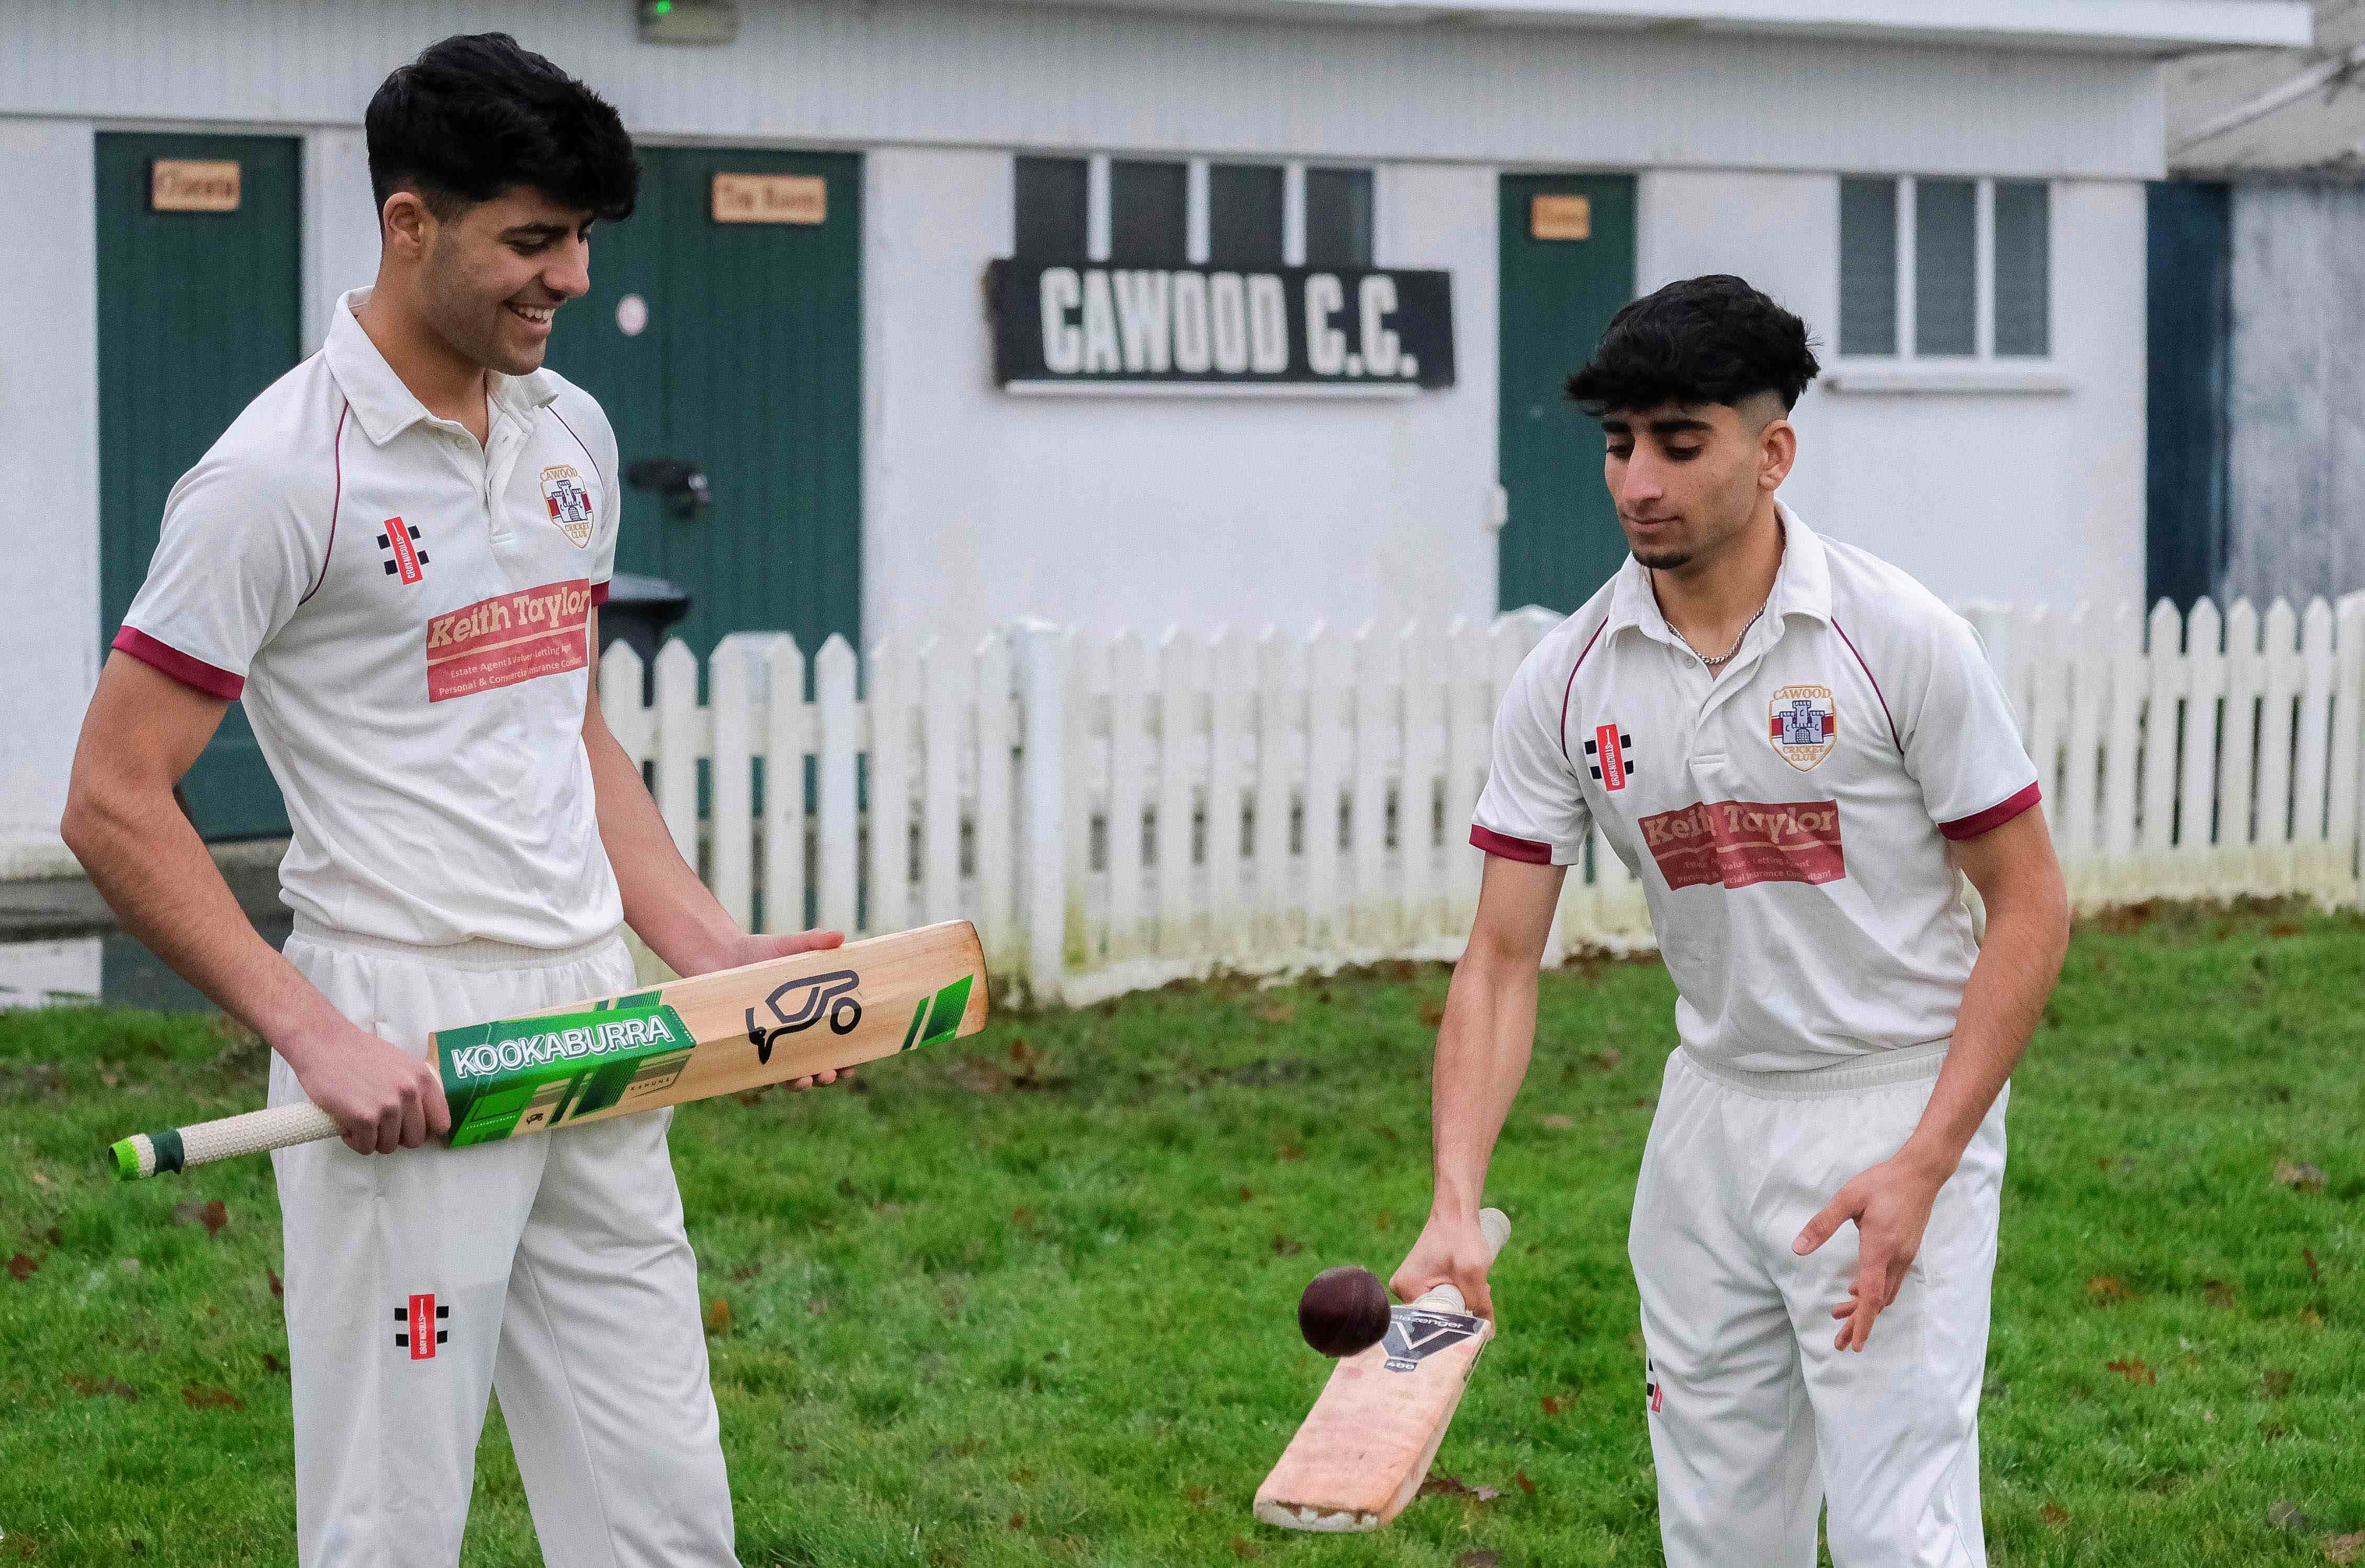 Two Cawood cricketers